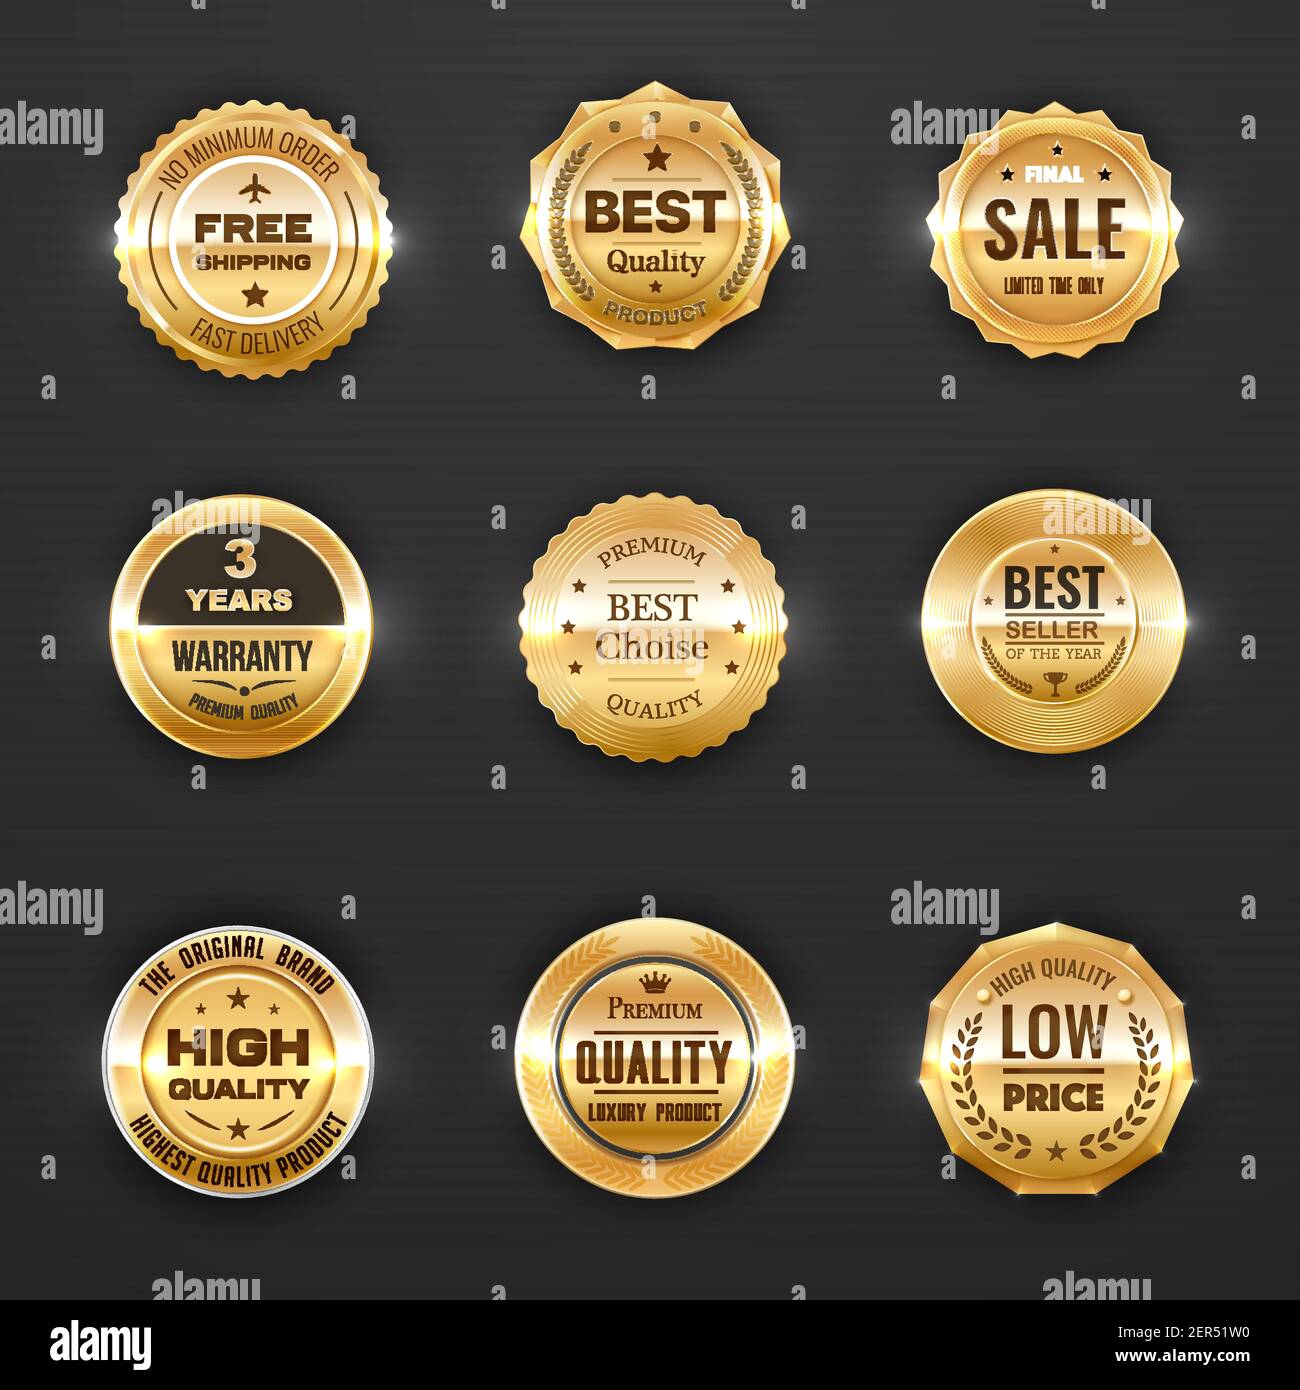 https://c8.alamy.com/comp/2ER51W0/warranty-and-quality-labels-vector-golden-emblems-with-laurel-branches-stars-and-crowns-best-quality-product-company-or-brand-award-badges-luxury-2ER51W0.jpg